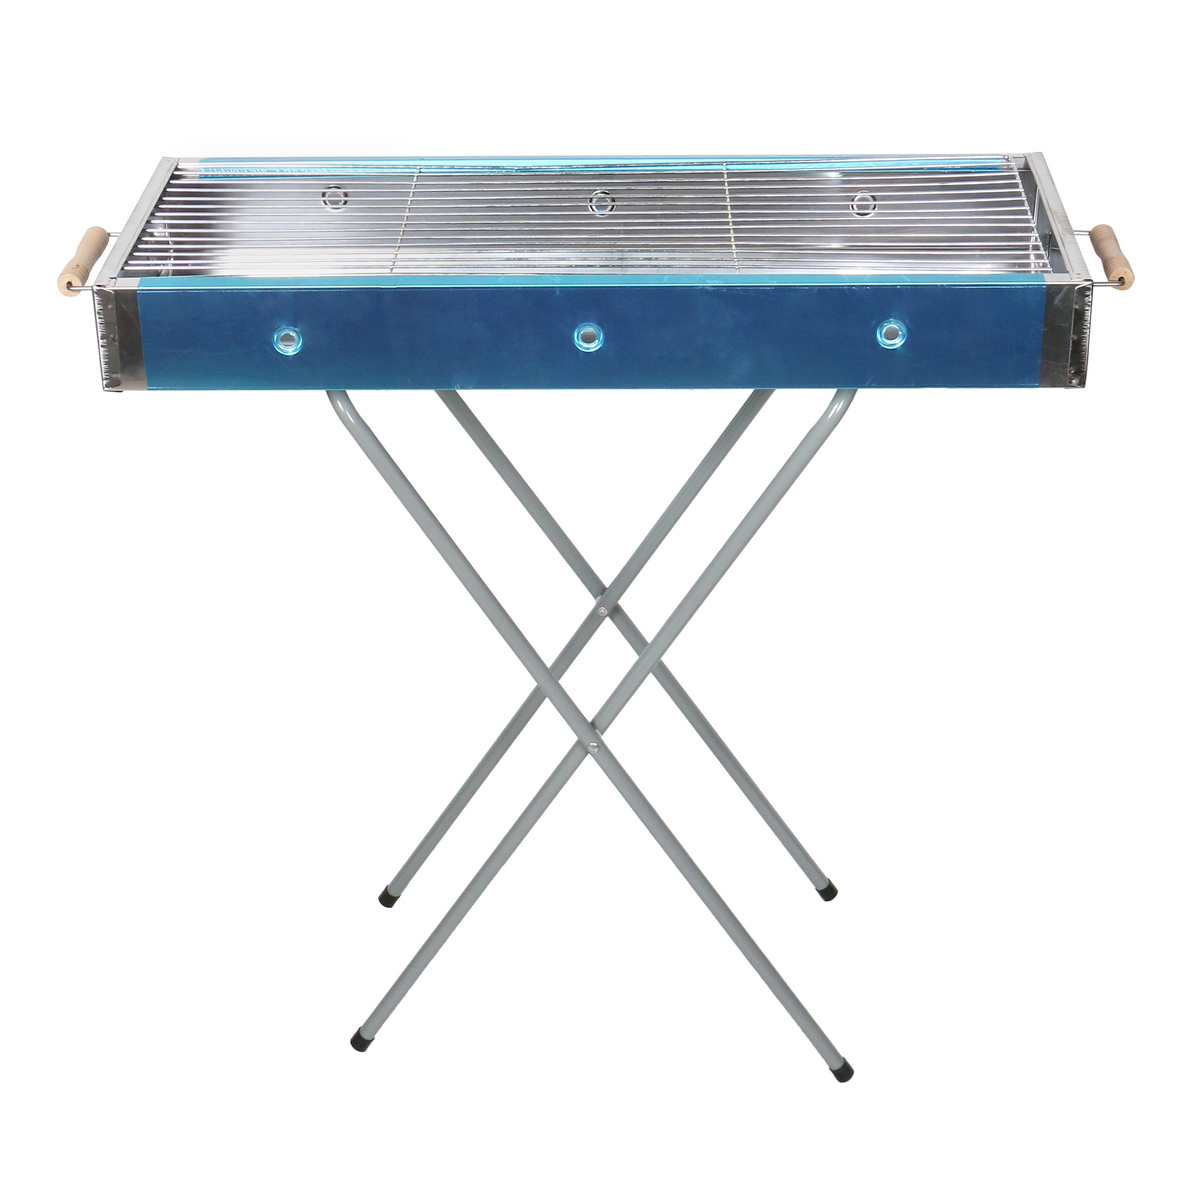 Campmate Stainless Steel Grill with Wooden Handle, CM-7006